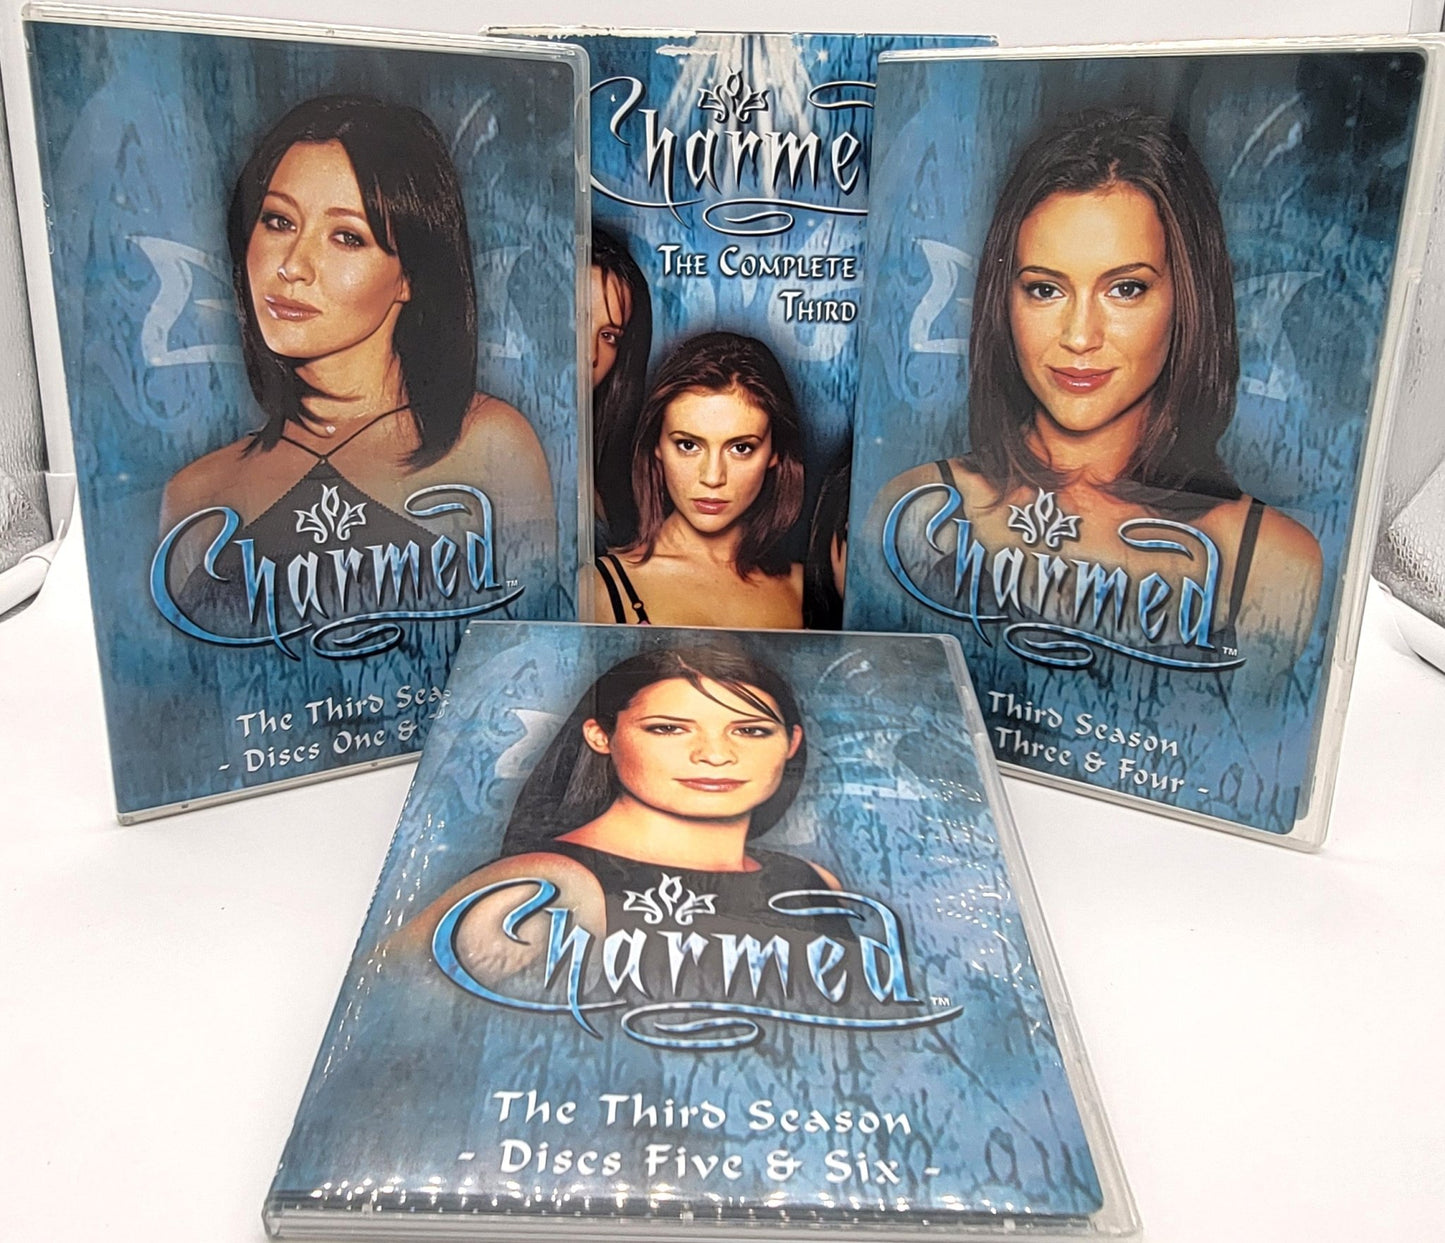 Paramount Pictures Home Entertainment - Charmed | DVD | The Complete Third Season - DVD - Steady Bunny Shop